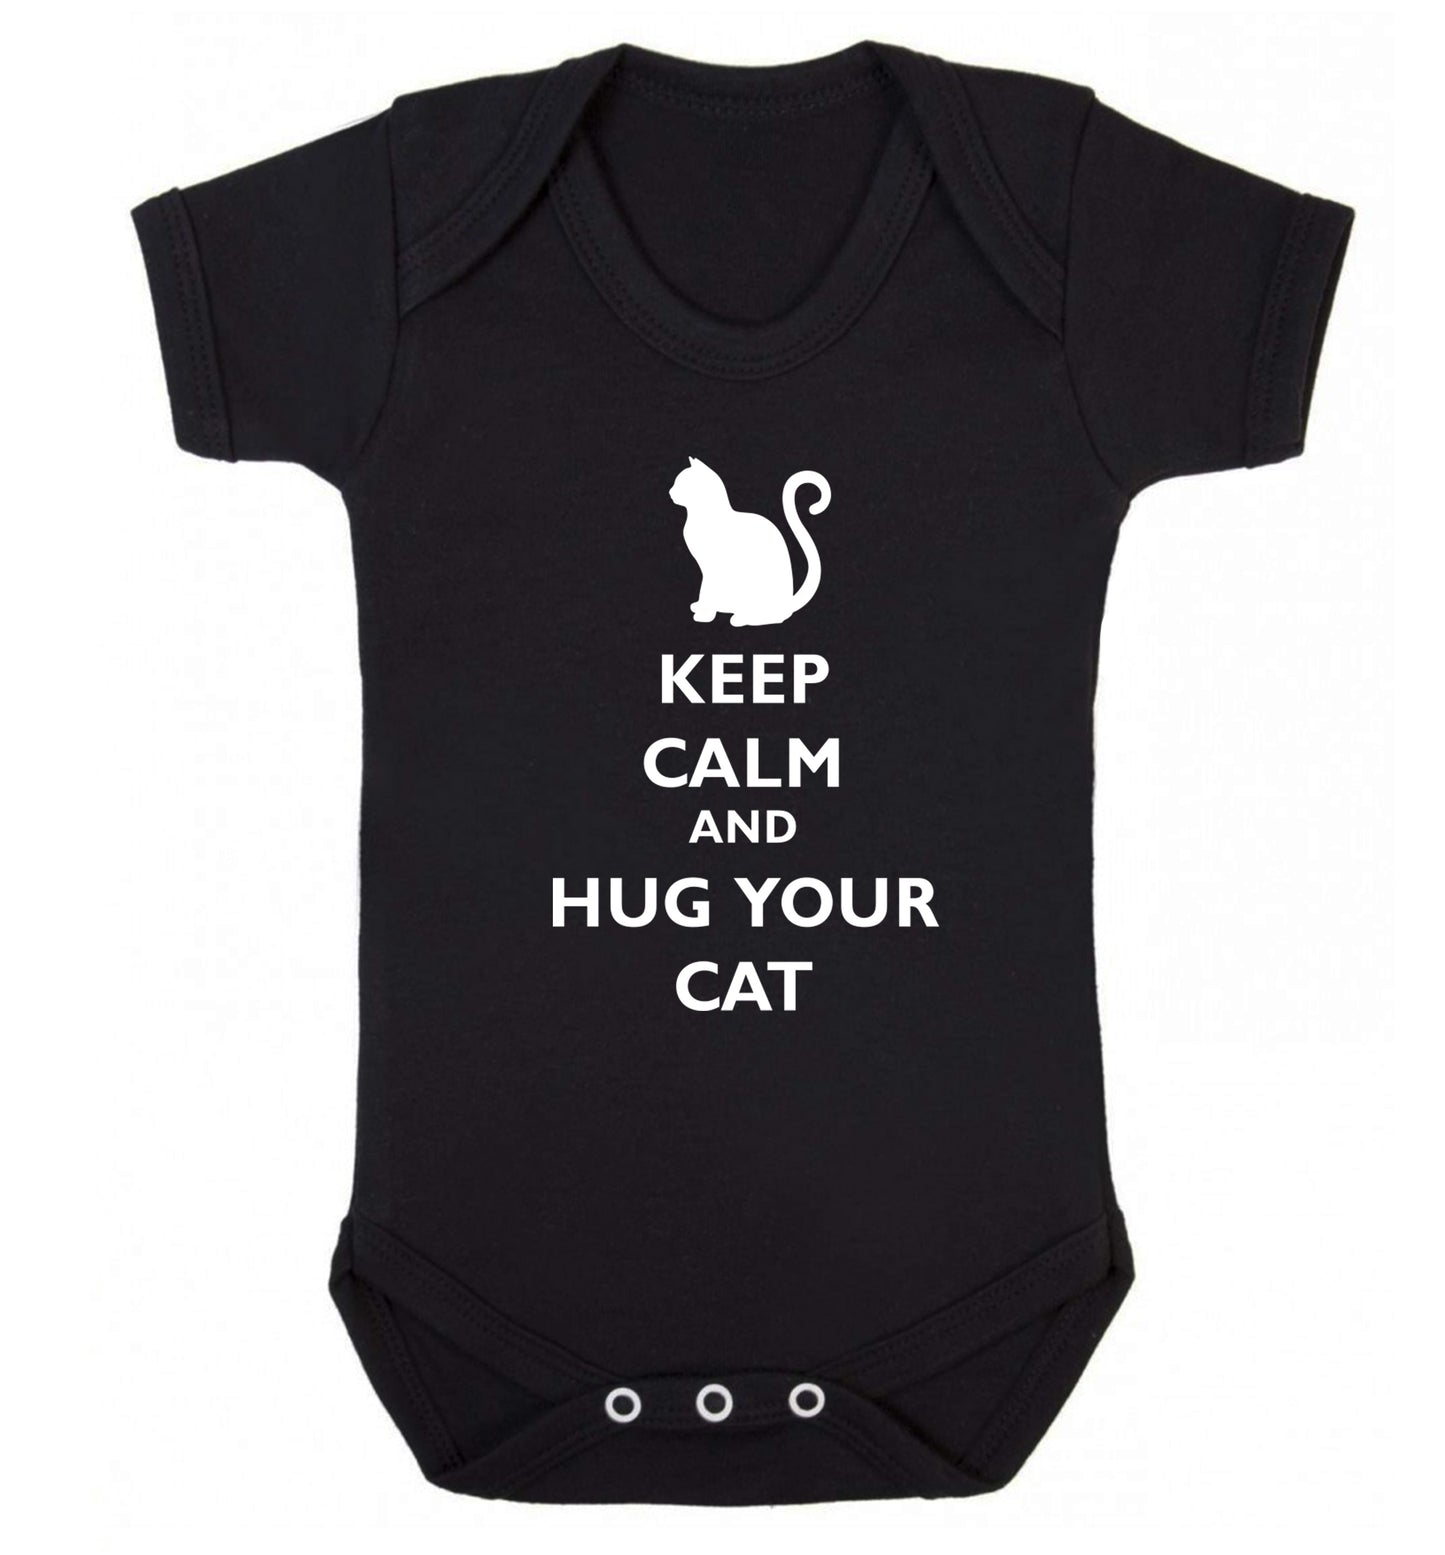 Keep calm and hug your cat Baby Vest black 18-24 months